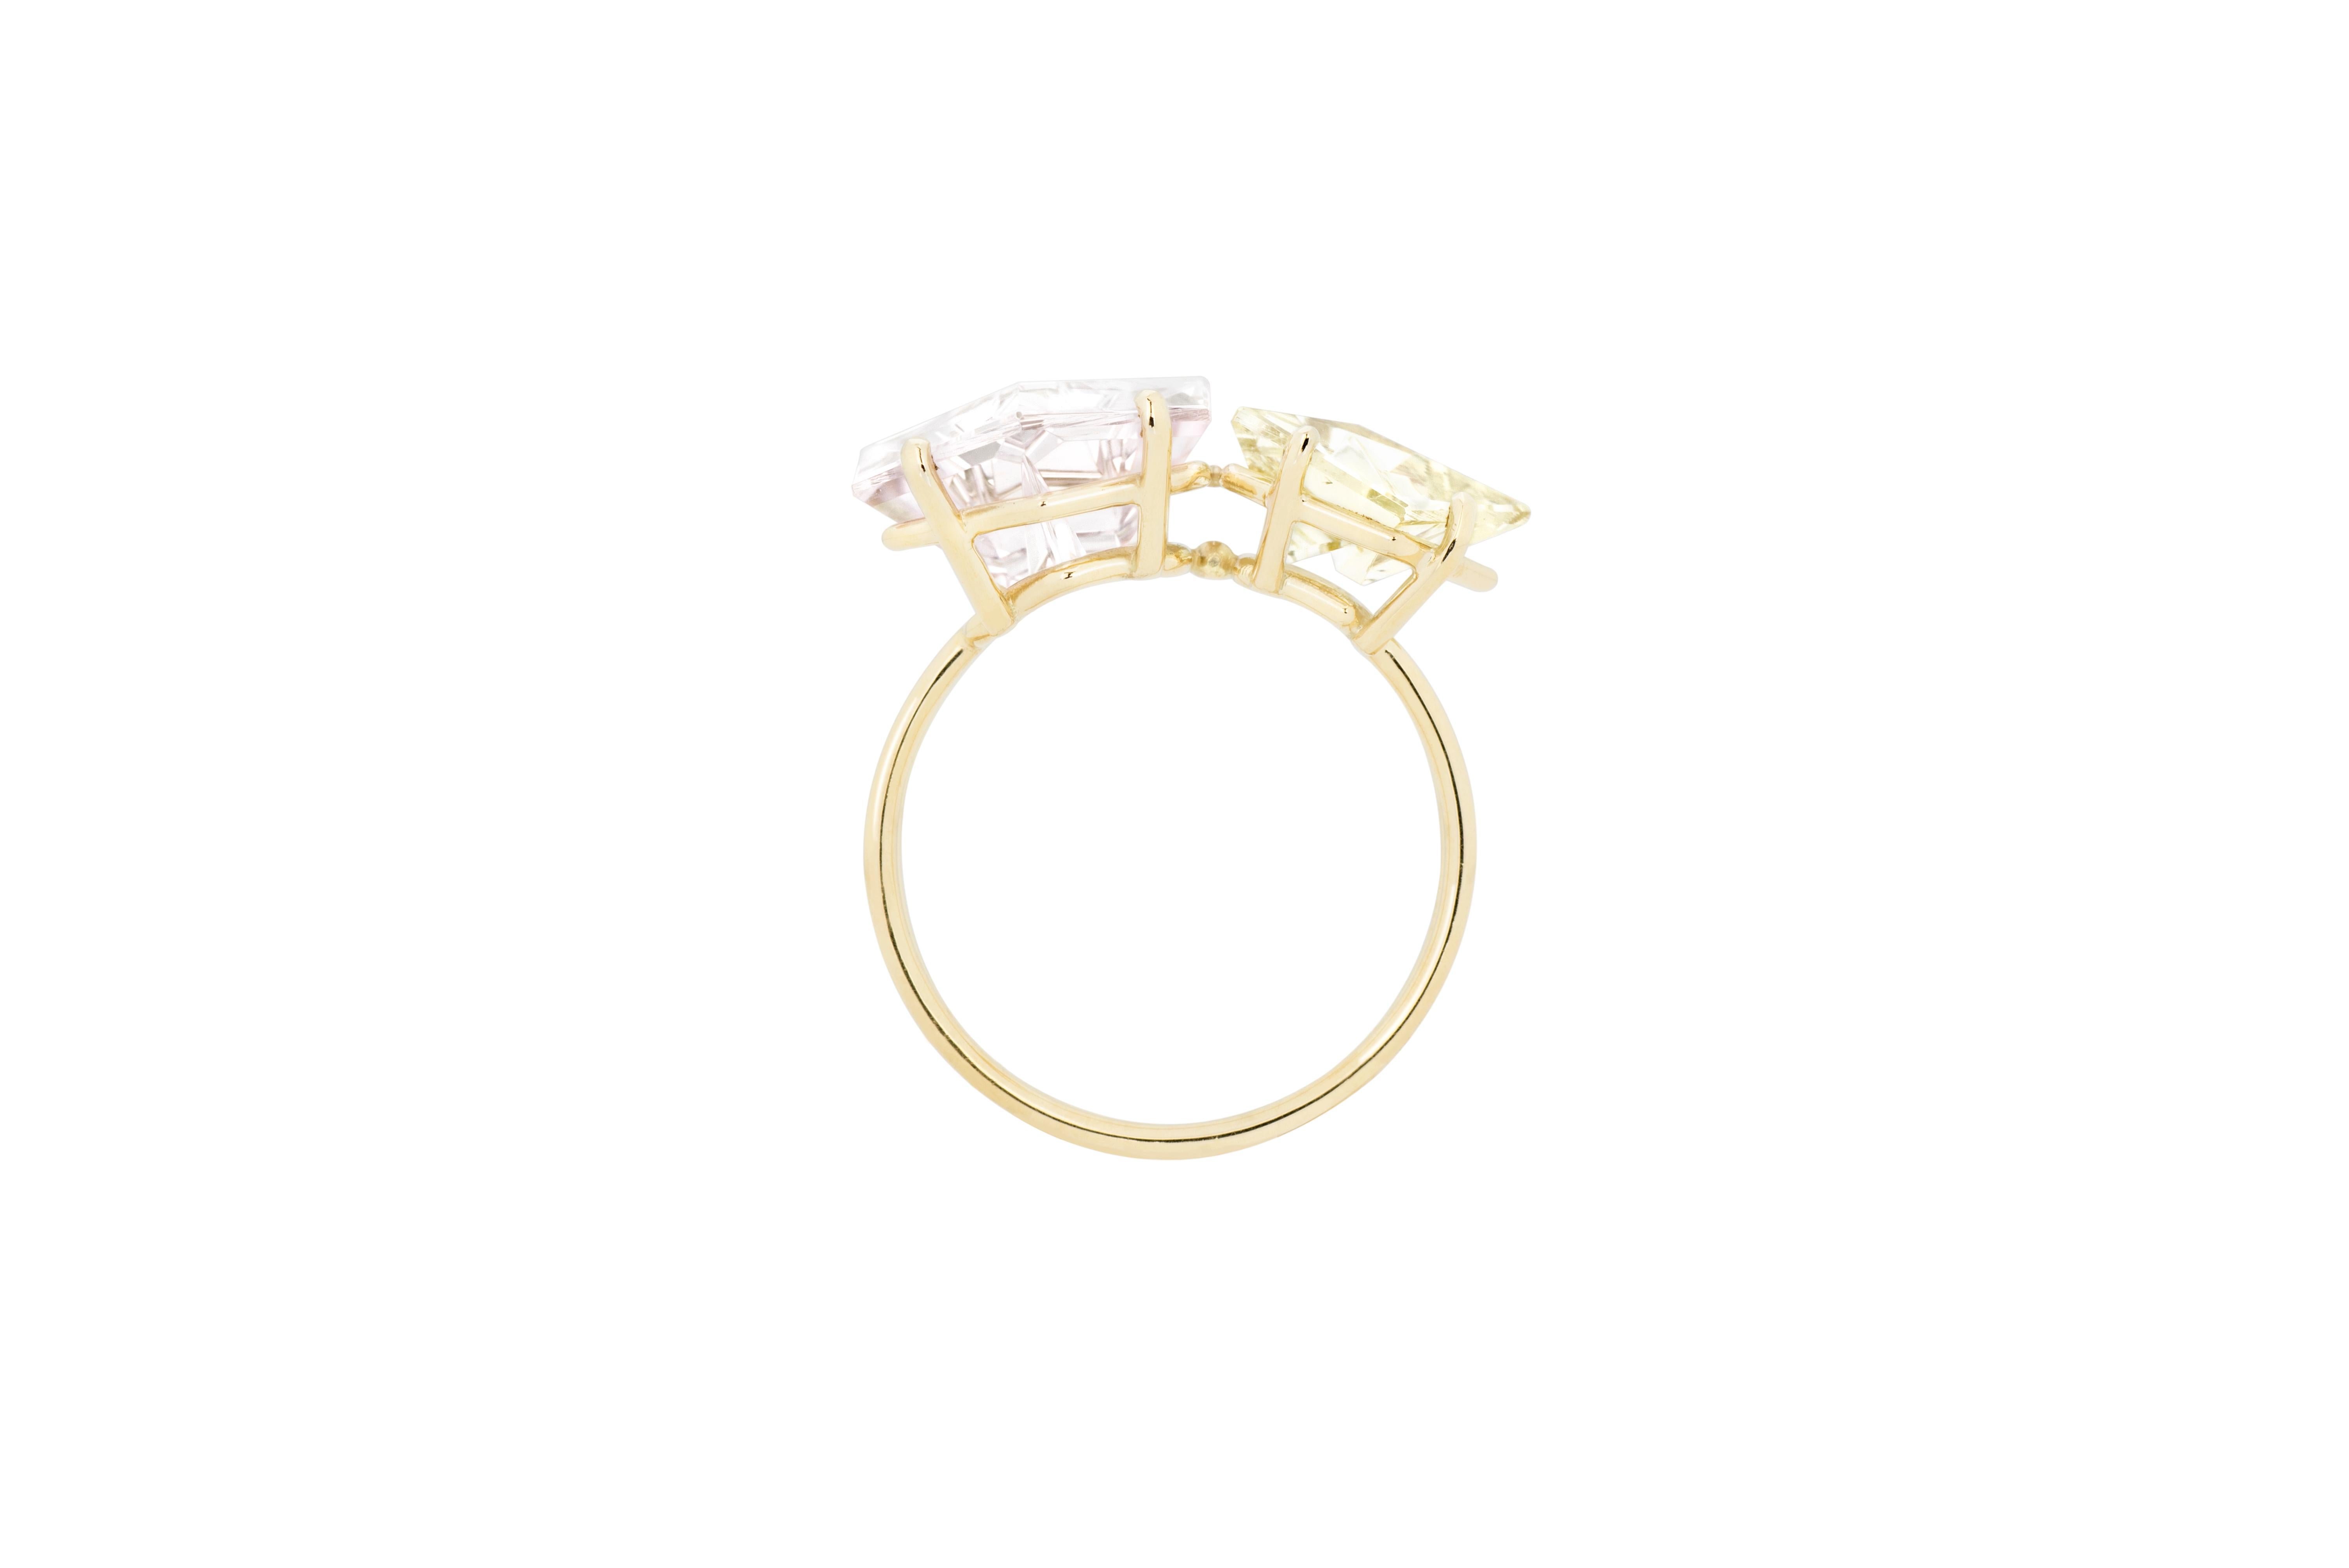 Created by Estela Guitart for MISUI, this 5.5 carat Morganite and 2 carat Golden Beryl Klar ring explores the harmony of colour. Fine gold structures frame the gemstones and give them a soft, airy feeling, highlighting their virtues.

To enhance the